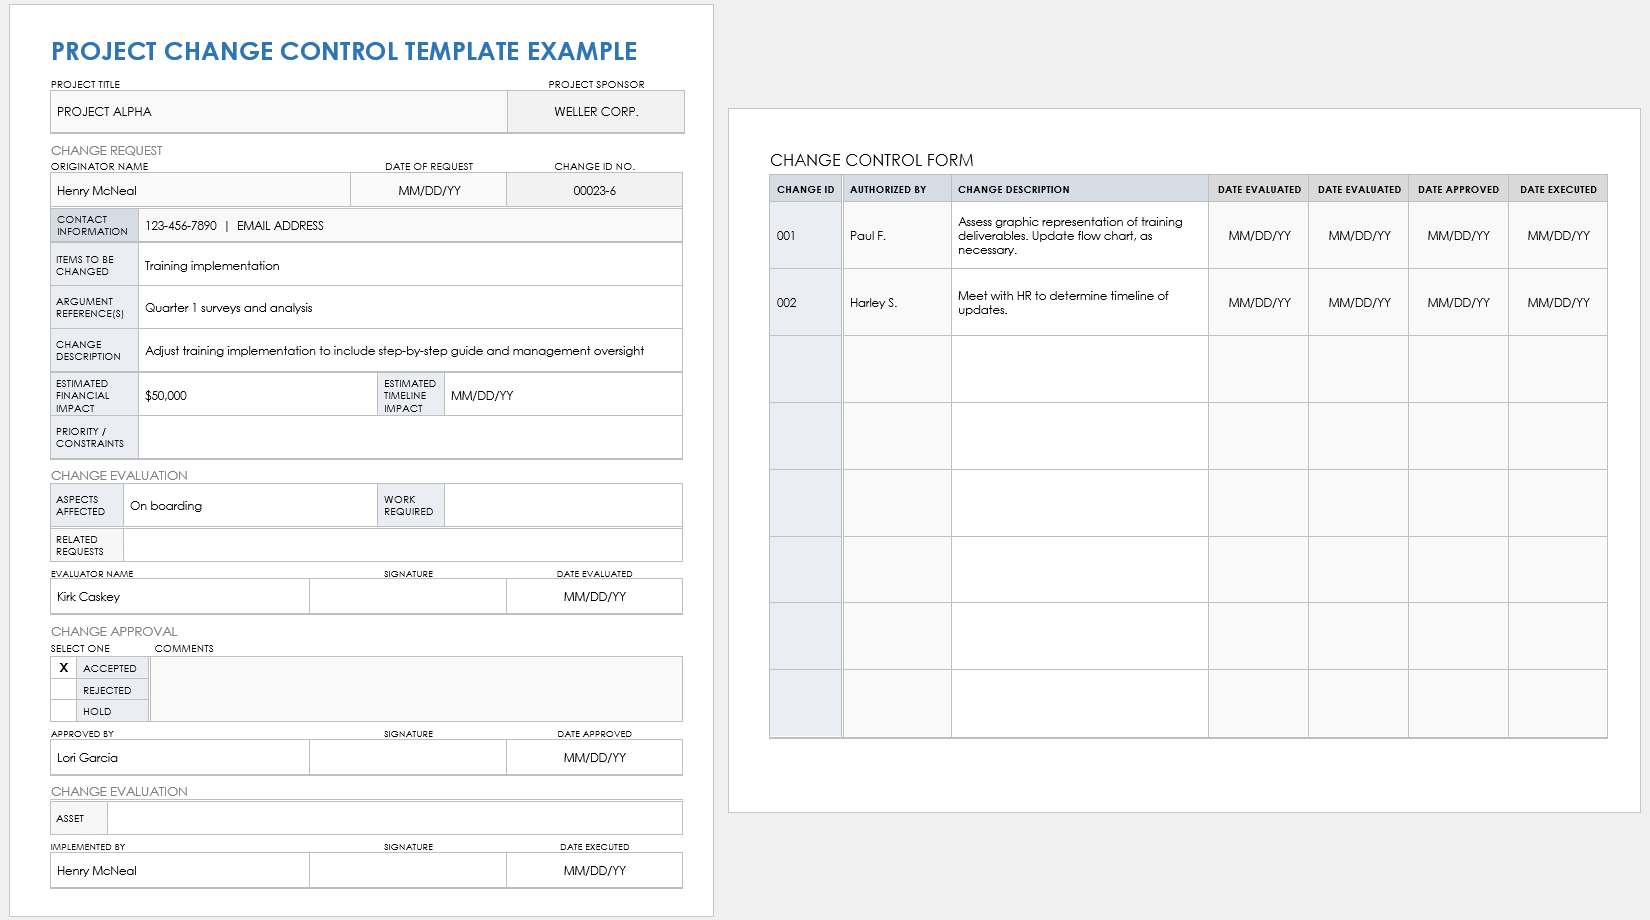 Project Change Control Example Template